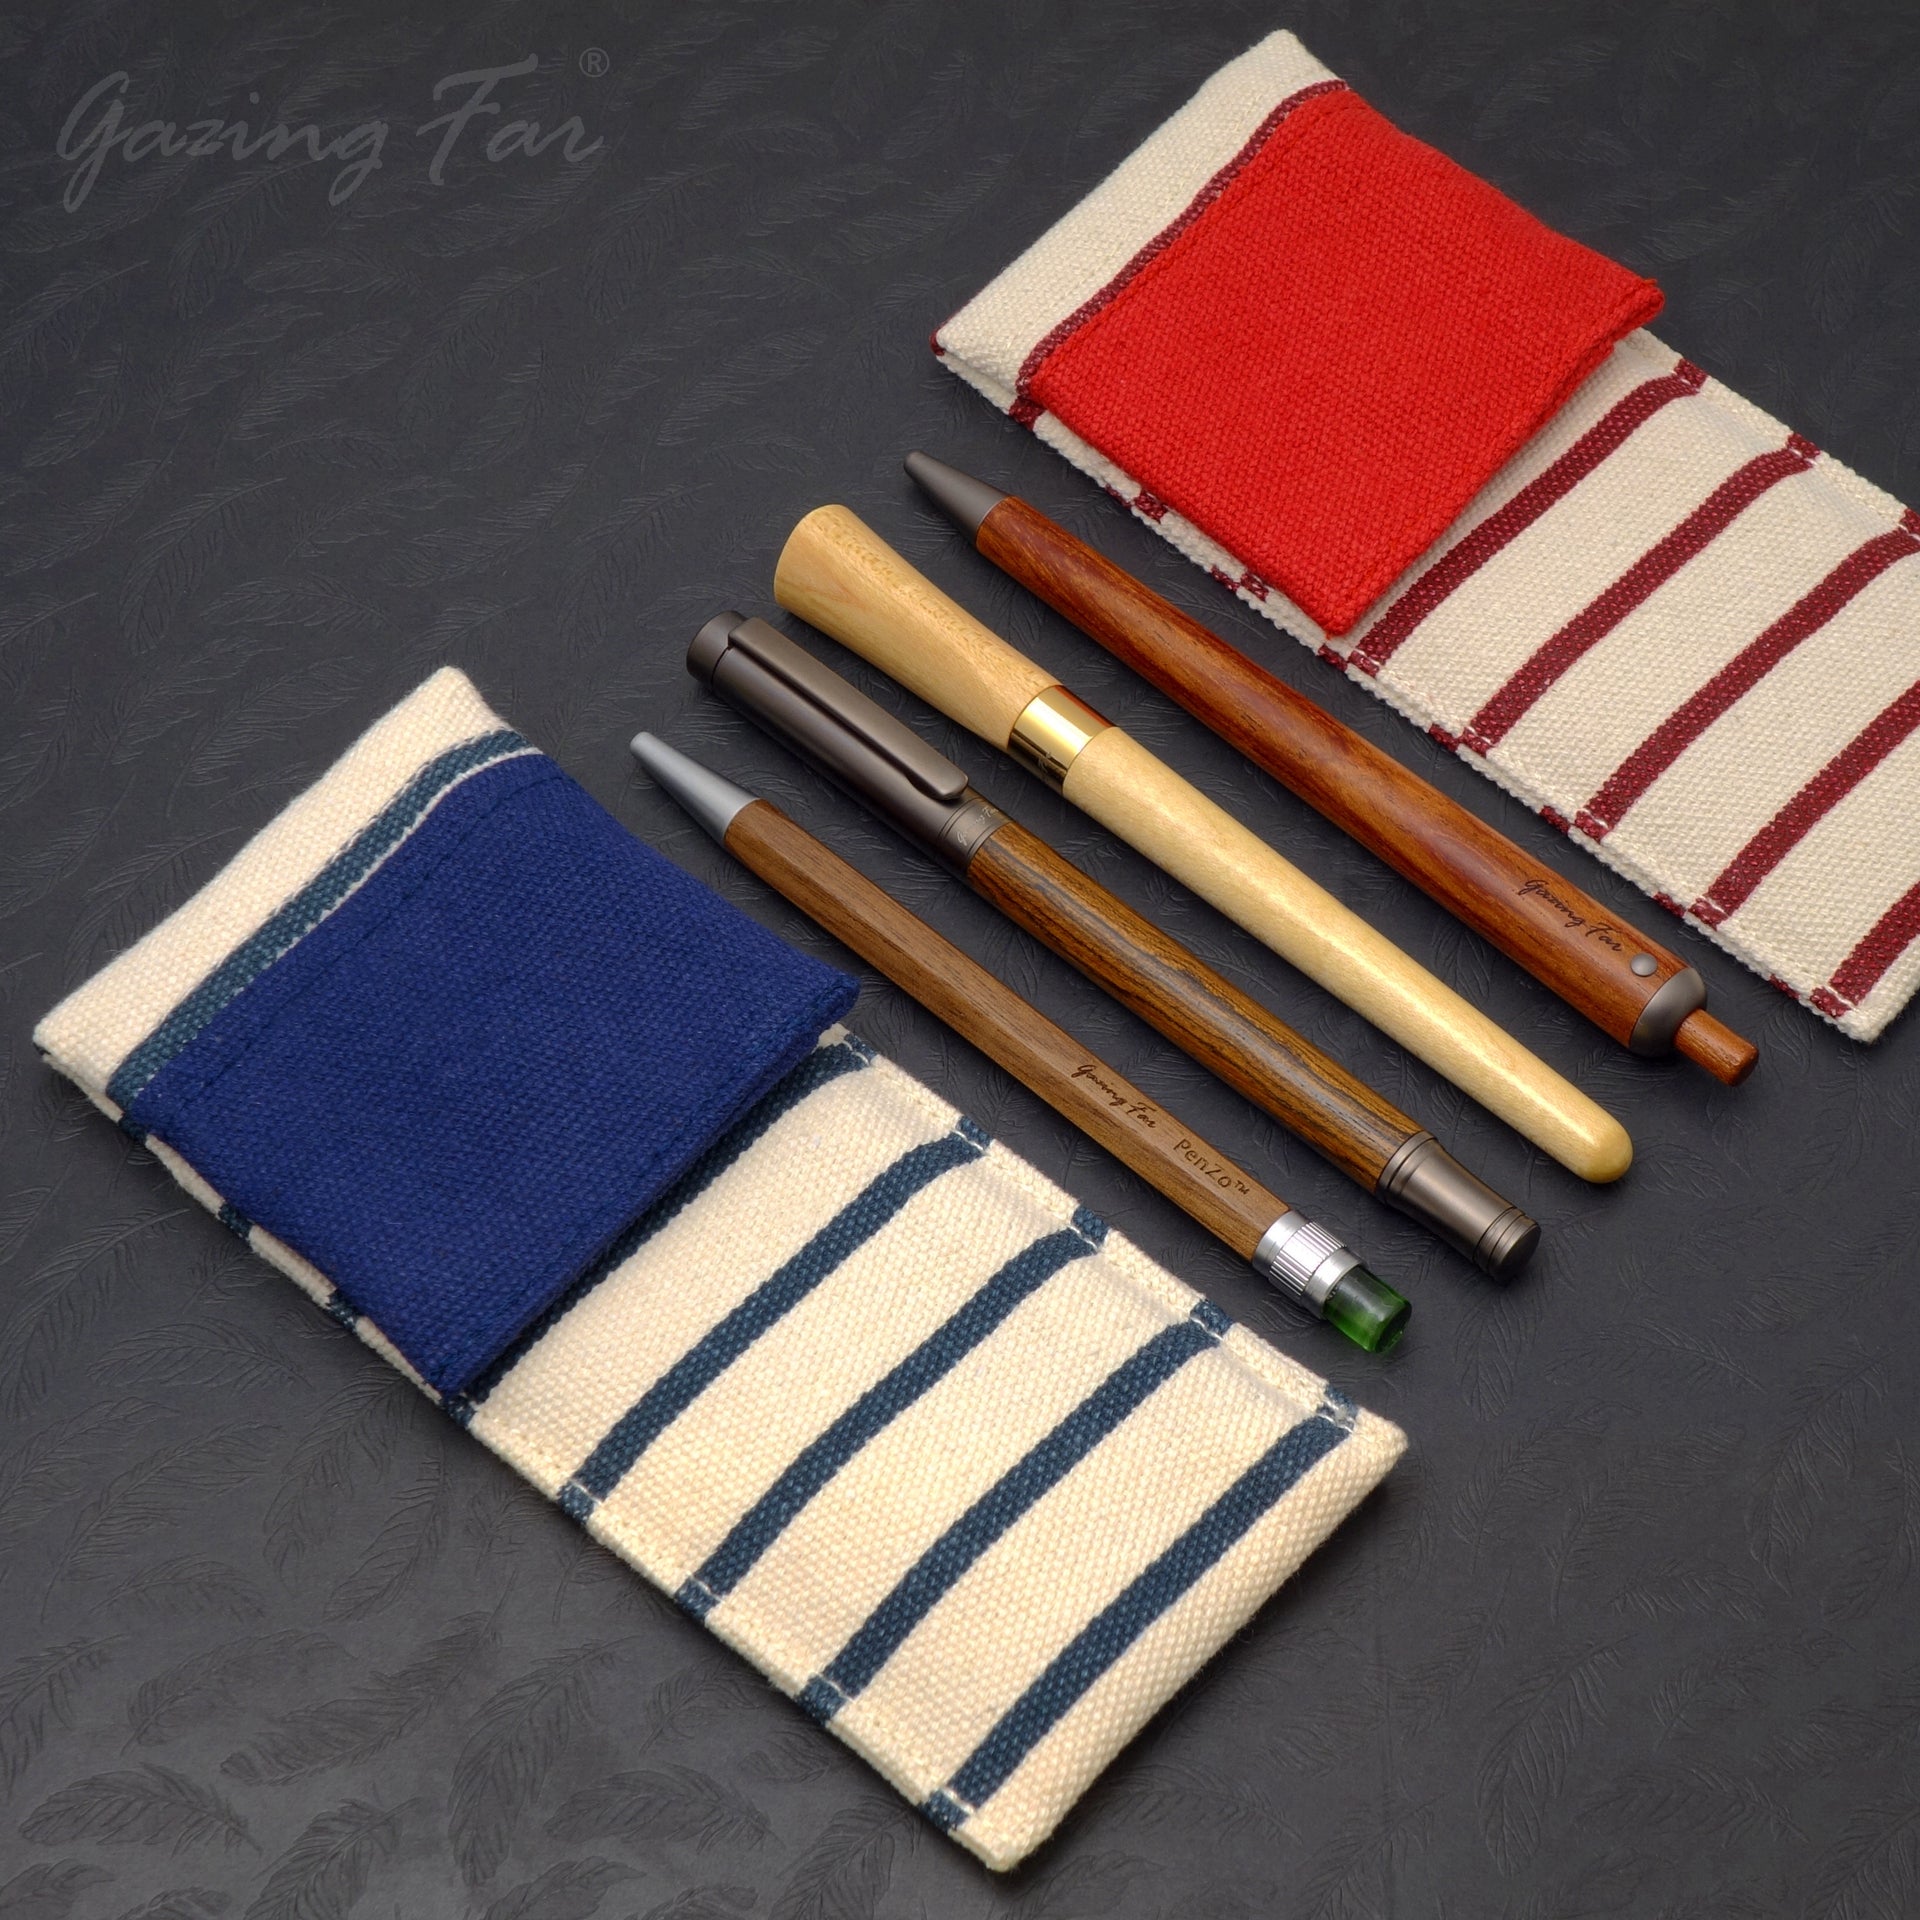 Simplicity Style, Natural Material,  The Gazing Far Canvas Pen Pouch give the Well Protection for your pens